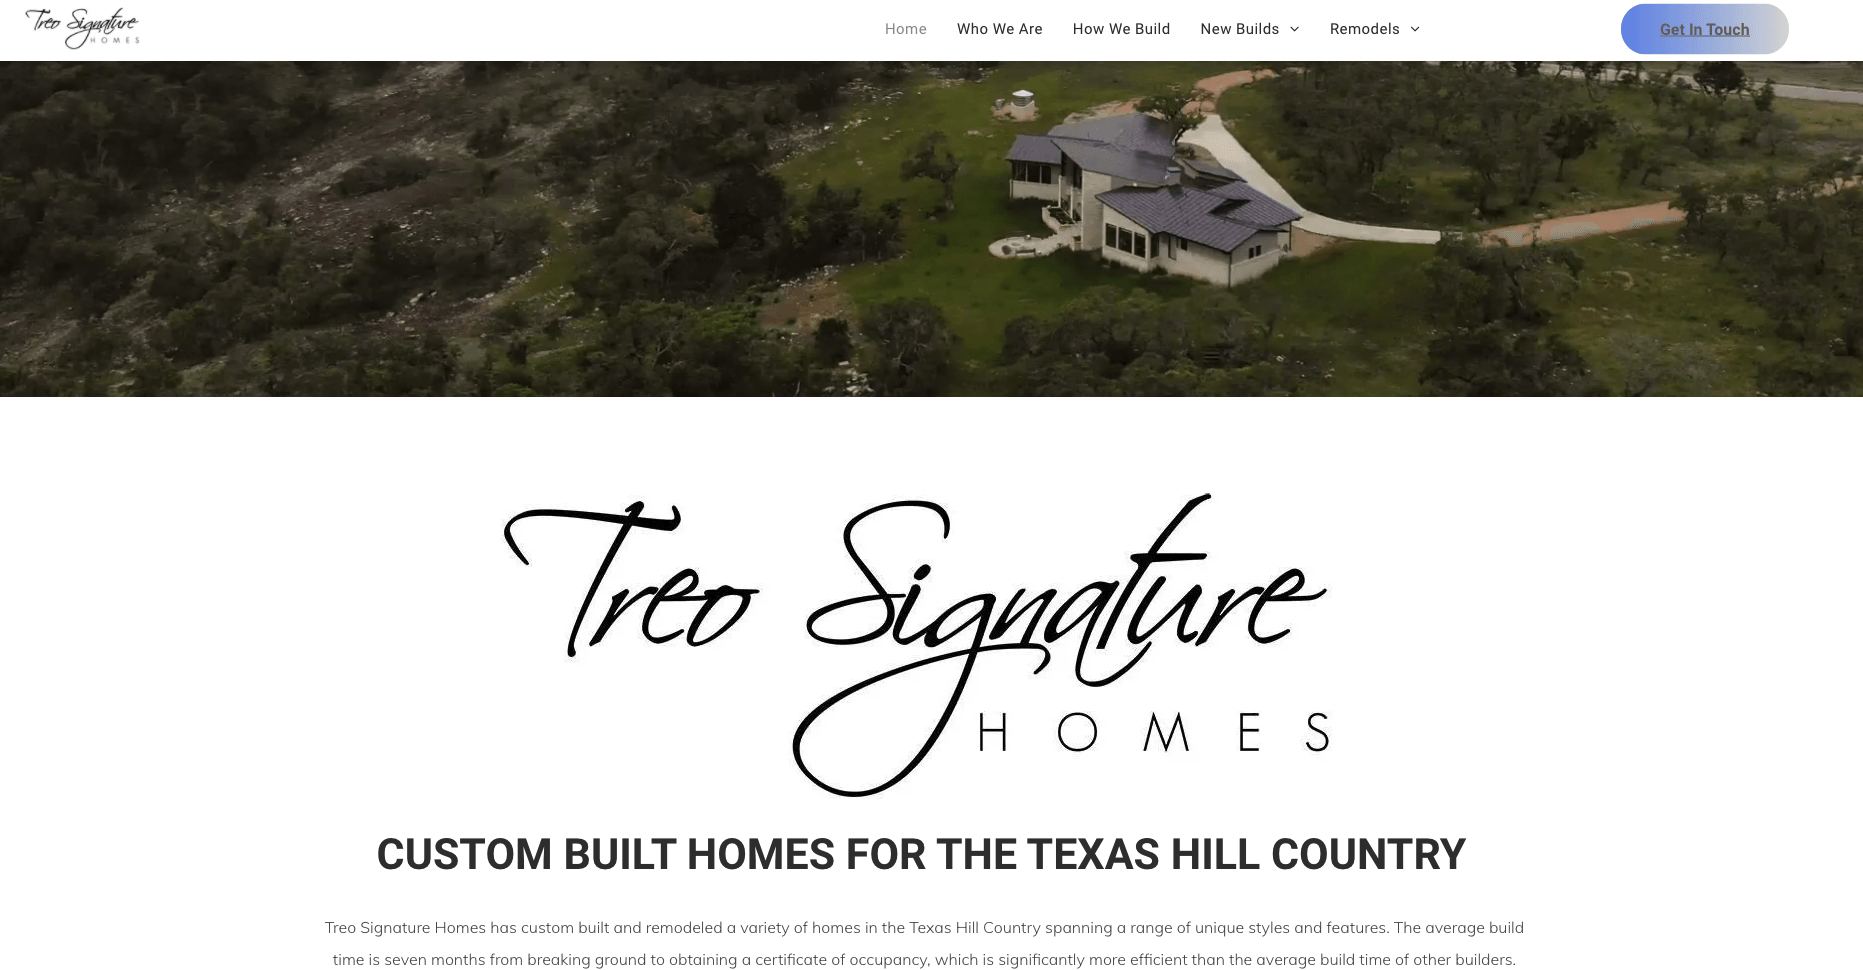 A website for a company called treo signature homes shows a house in the middle of a forest.